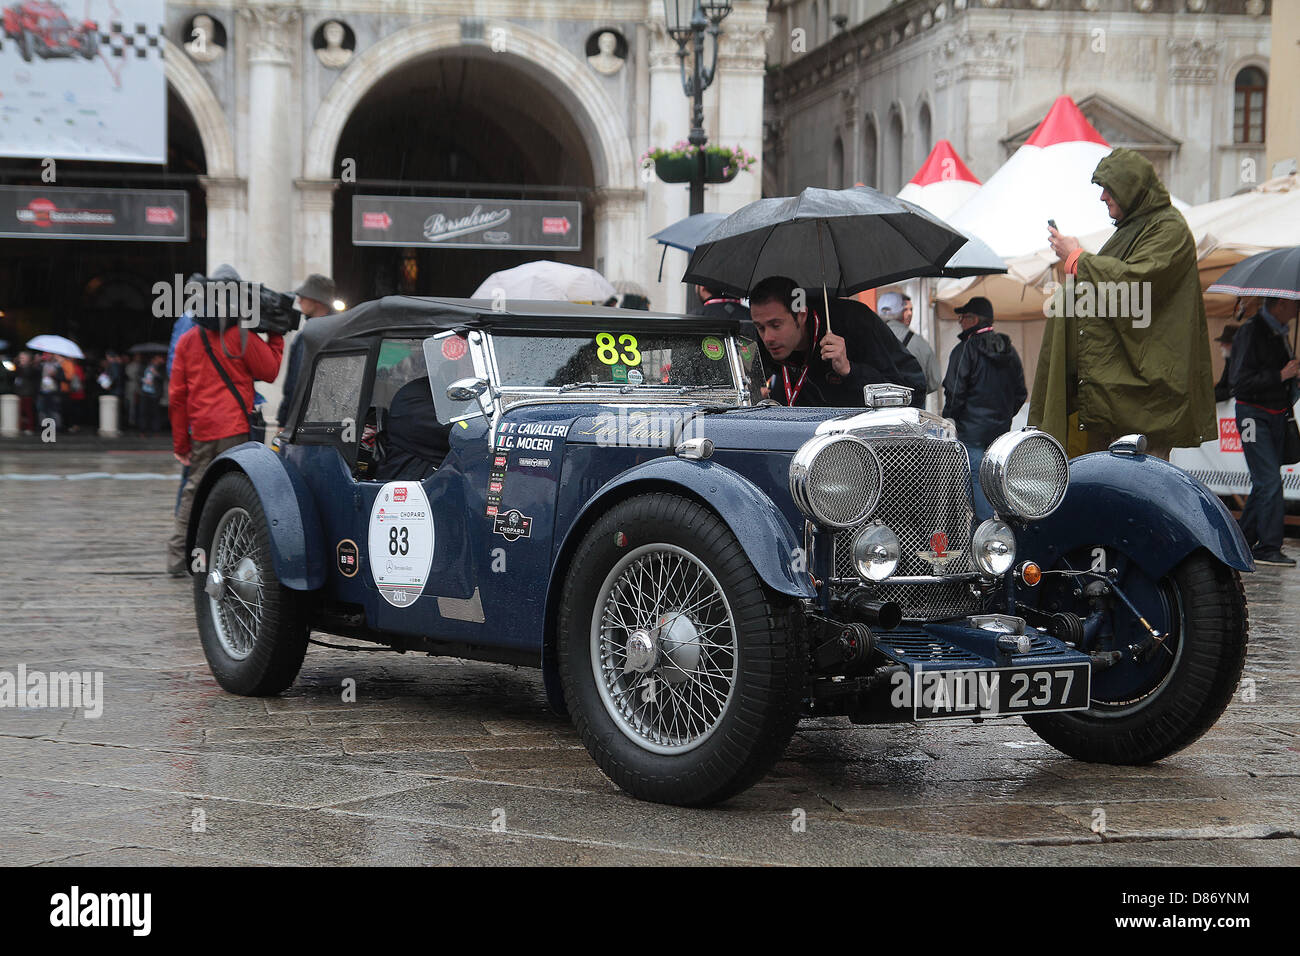 A vintage 1933 Aston Martin Le Mans competes in the 1000 mile Mille Miglia round trip from Brescia to Rome and back again. Stock Photo